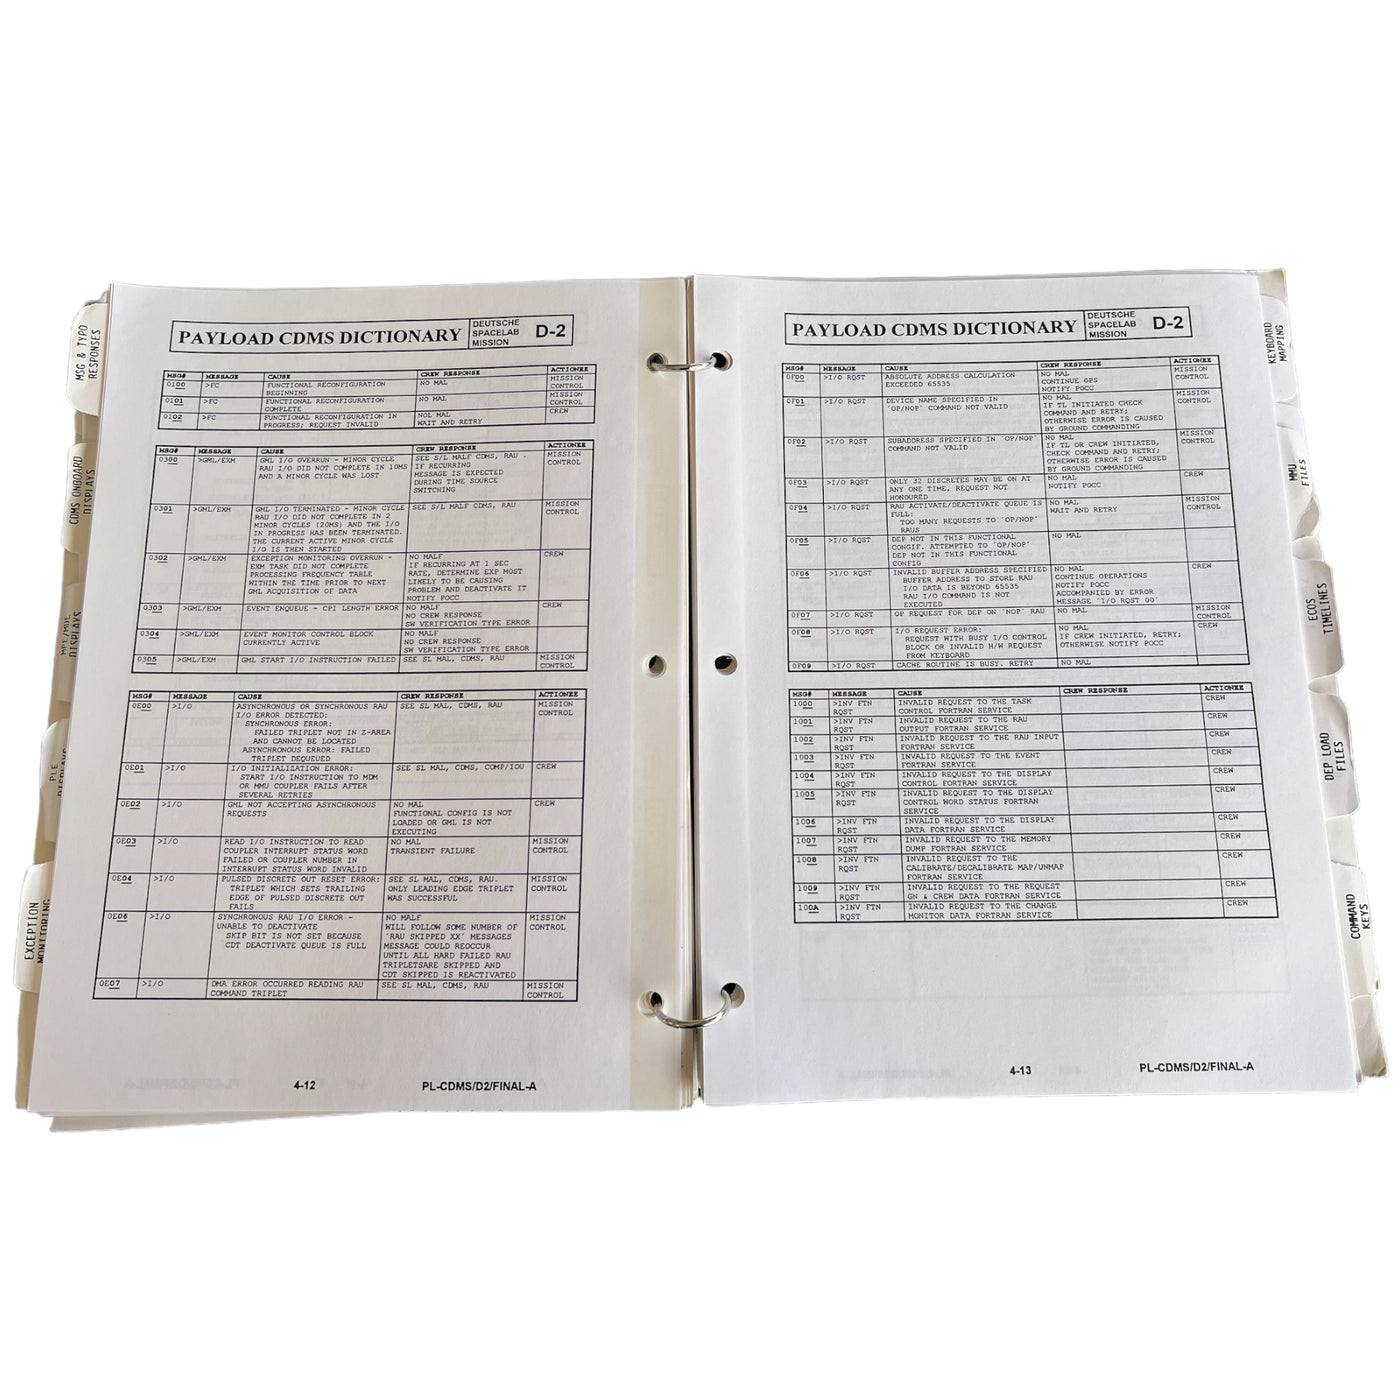 STS-55 – D2 – Command and Date checklist - ex Hans Schlegel